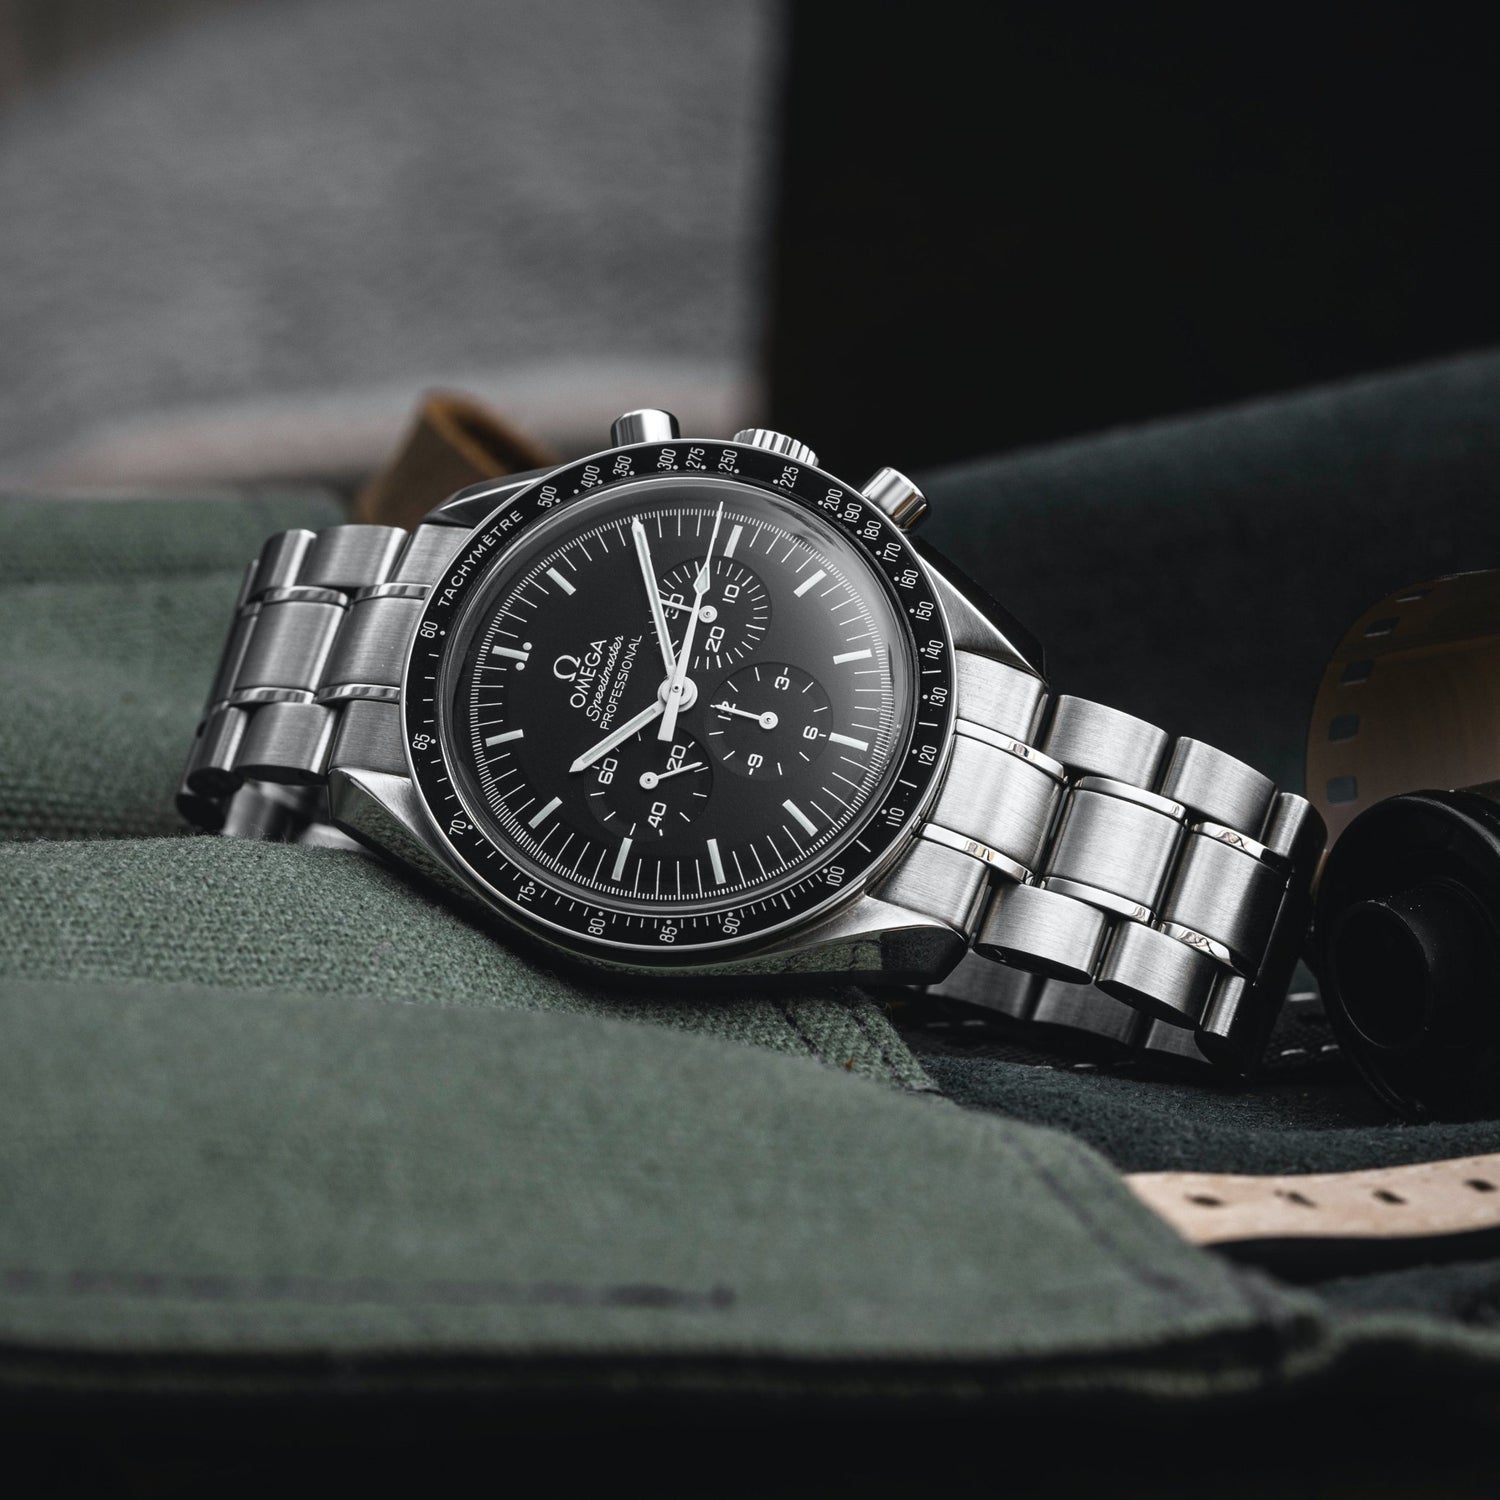 Wear & Care: The 8 Best Everyday Watches and Maintenance Tips!